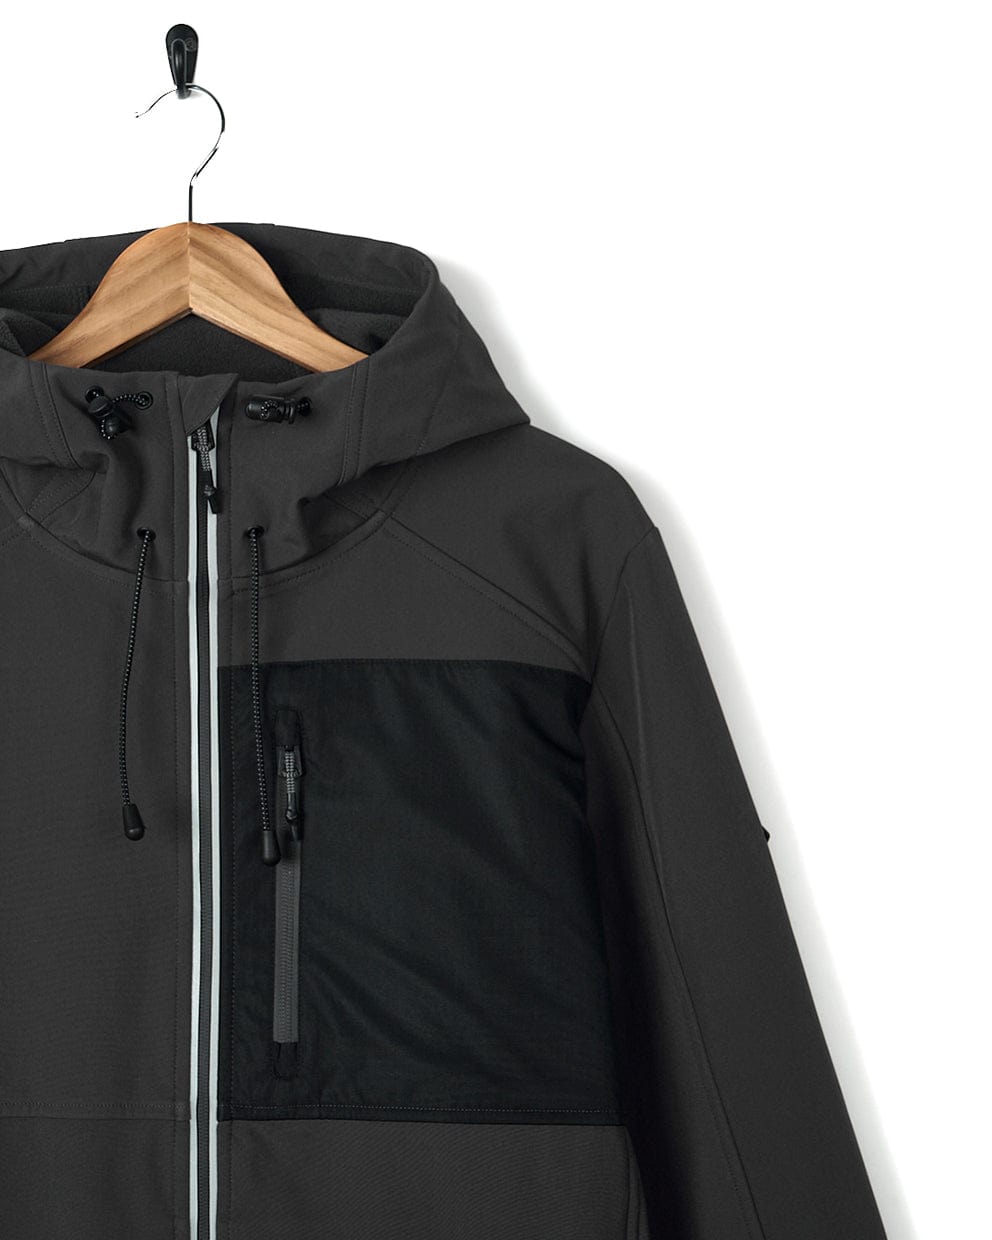 A grey Saltrock jacket, made with water-resistant fabric, is hanging on a hanger.